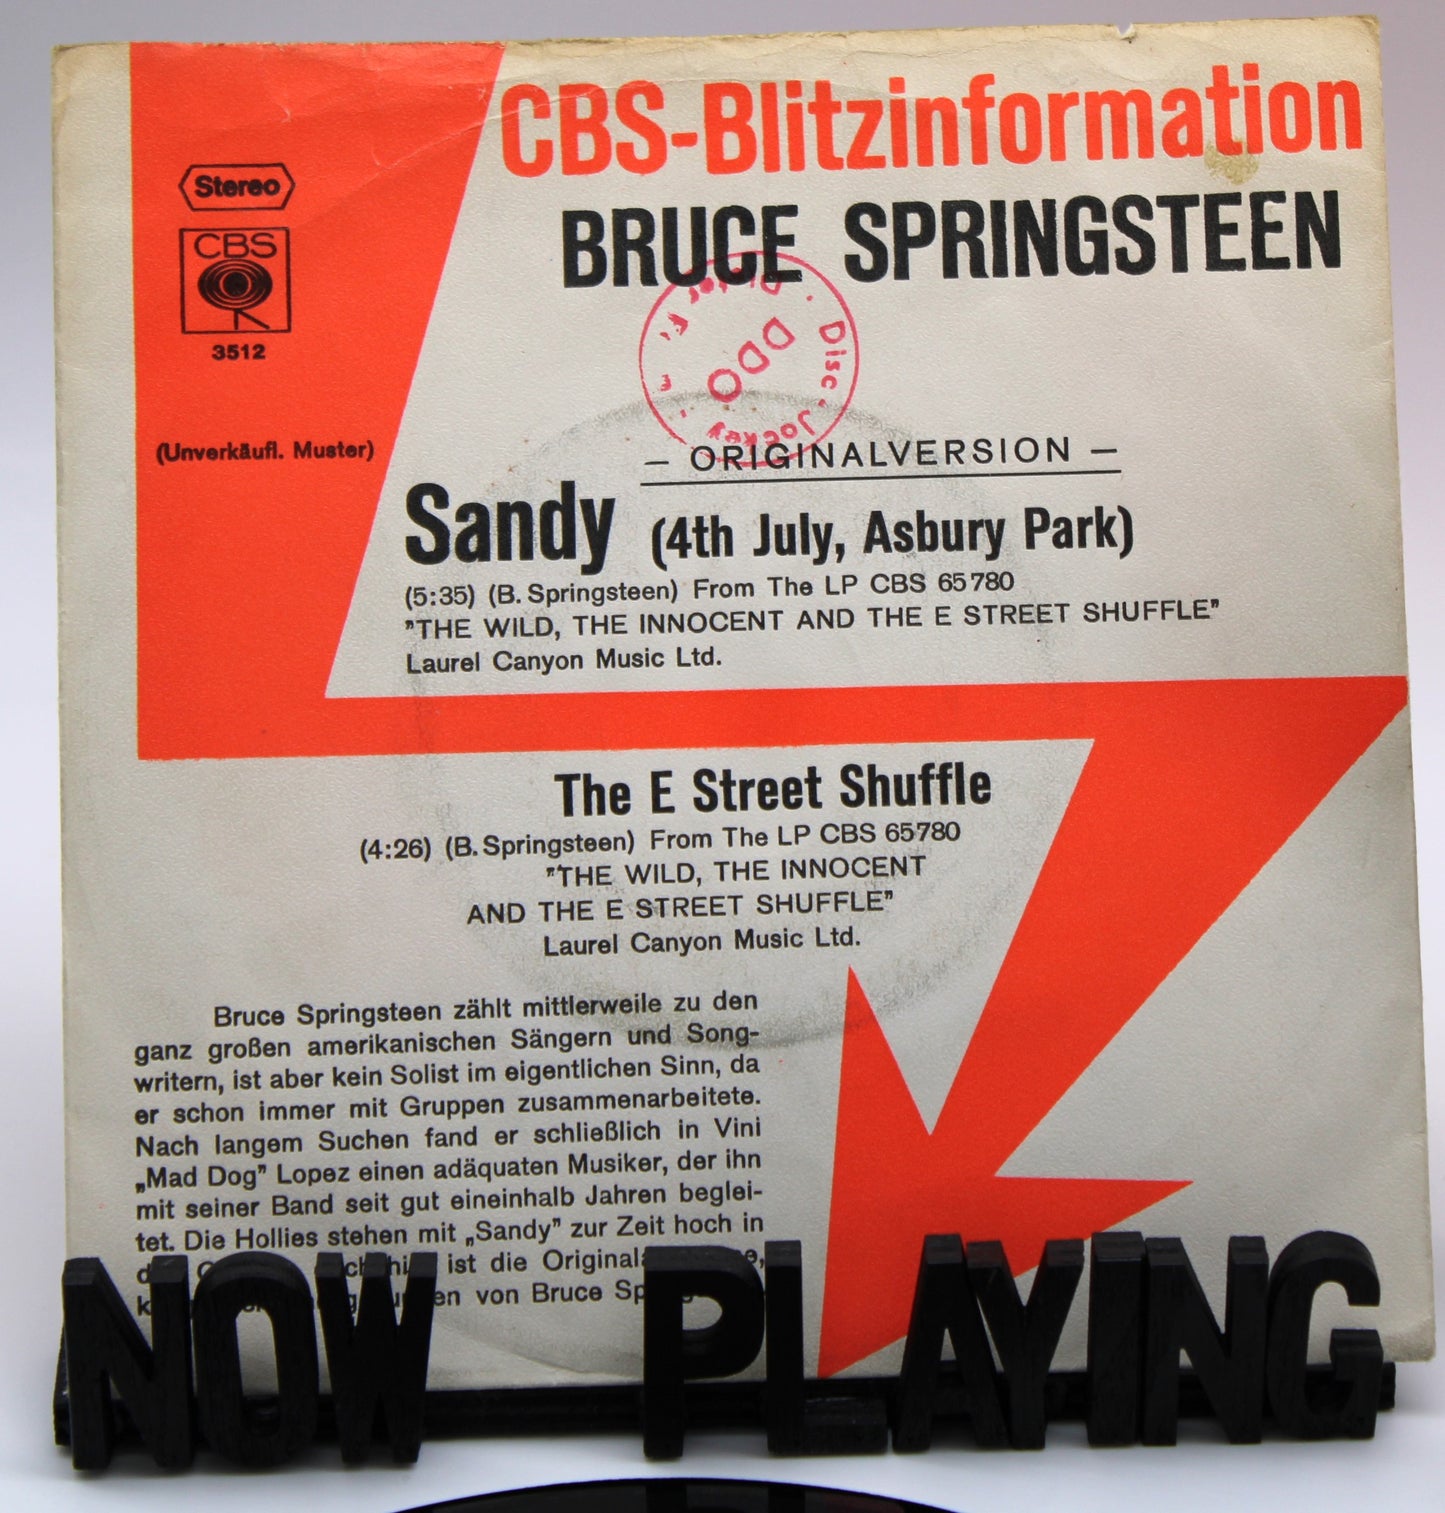 Bruce Springsteen & ESB – Rare German collection of 45s - Four “Blitzinformation" Promo records